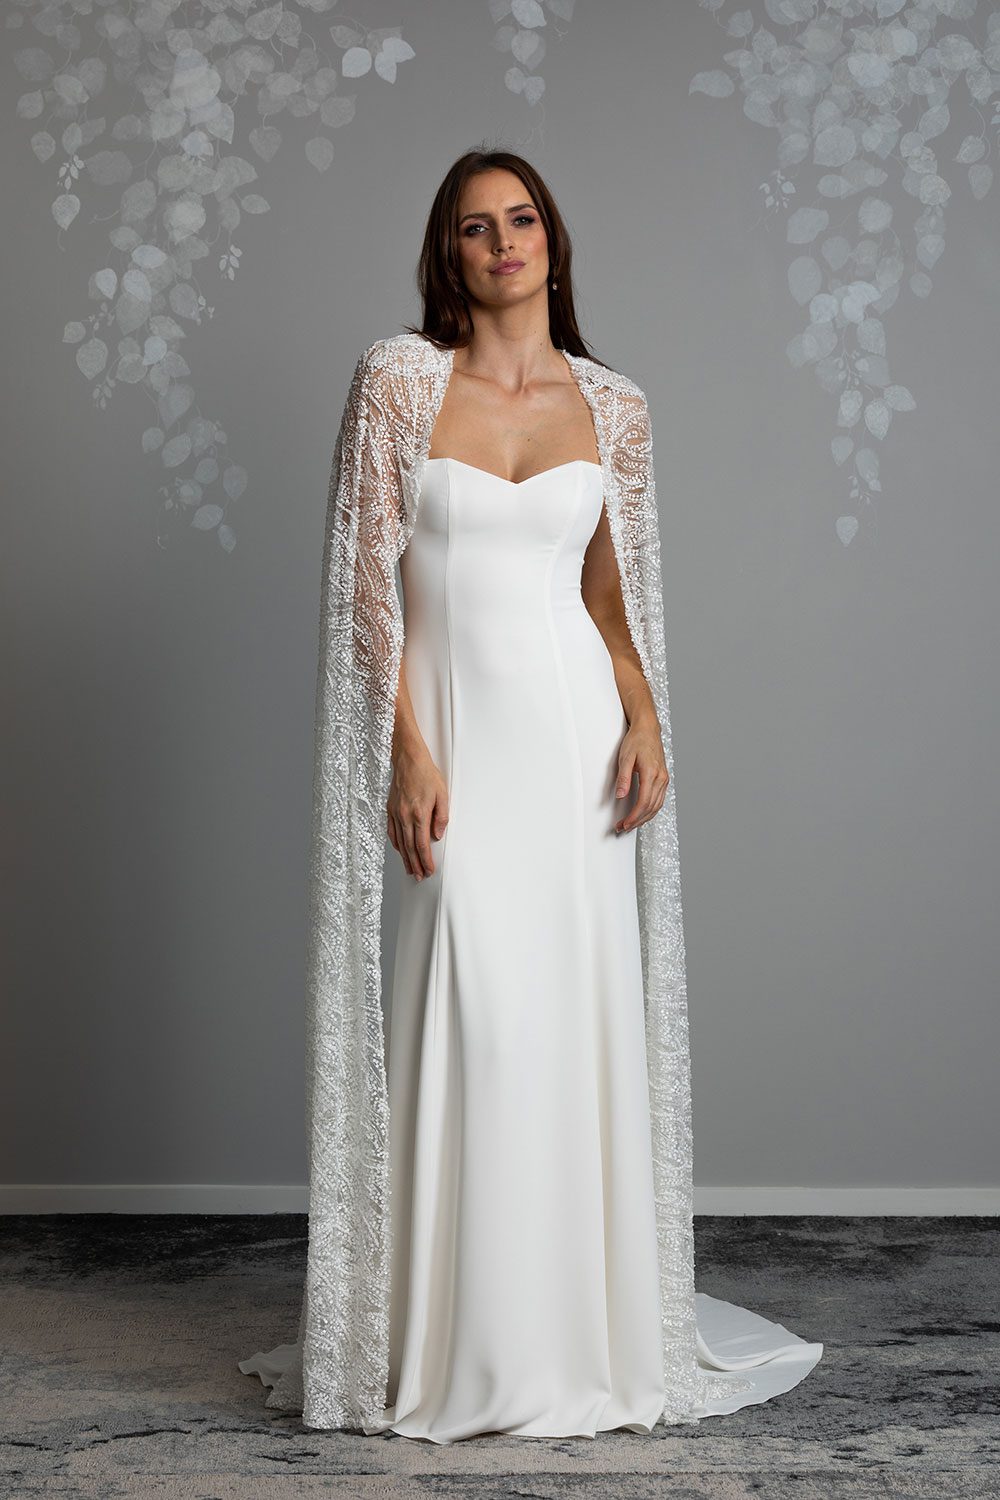 Lourde wedding Dress by Vinka Design - A dazzling display of beaded lace draped artfully from the shoulder, our Lourde gown is the epitome of timeless bridal elegance. Lourde’s cape features accentuated shoulders and opulent, iridescent beading. Crafted with functionality in mind, the richly beaded cape is detachable and reveals a panel cut gown with a fit-and-flare silhouette made in luxurious bridal crepe that falls flawlessly into a flared train. Full length view of model wearing sweetheart neckline gown with thin straps made of bridal crepe with a beaded cape draped over shoulders and flared train